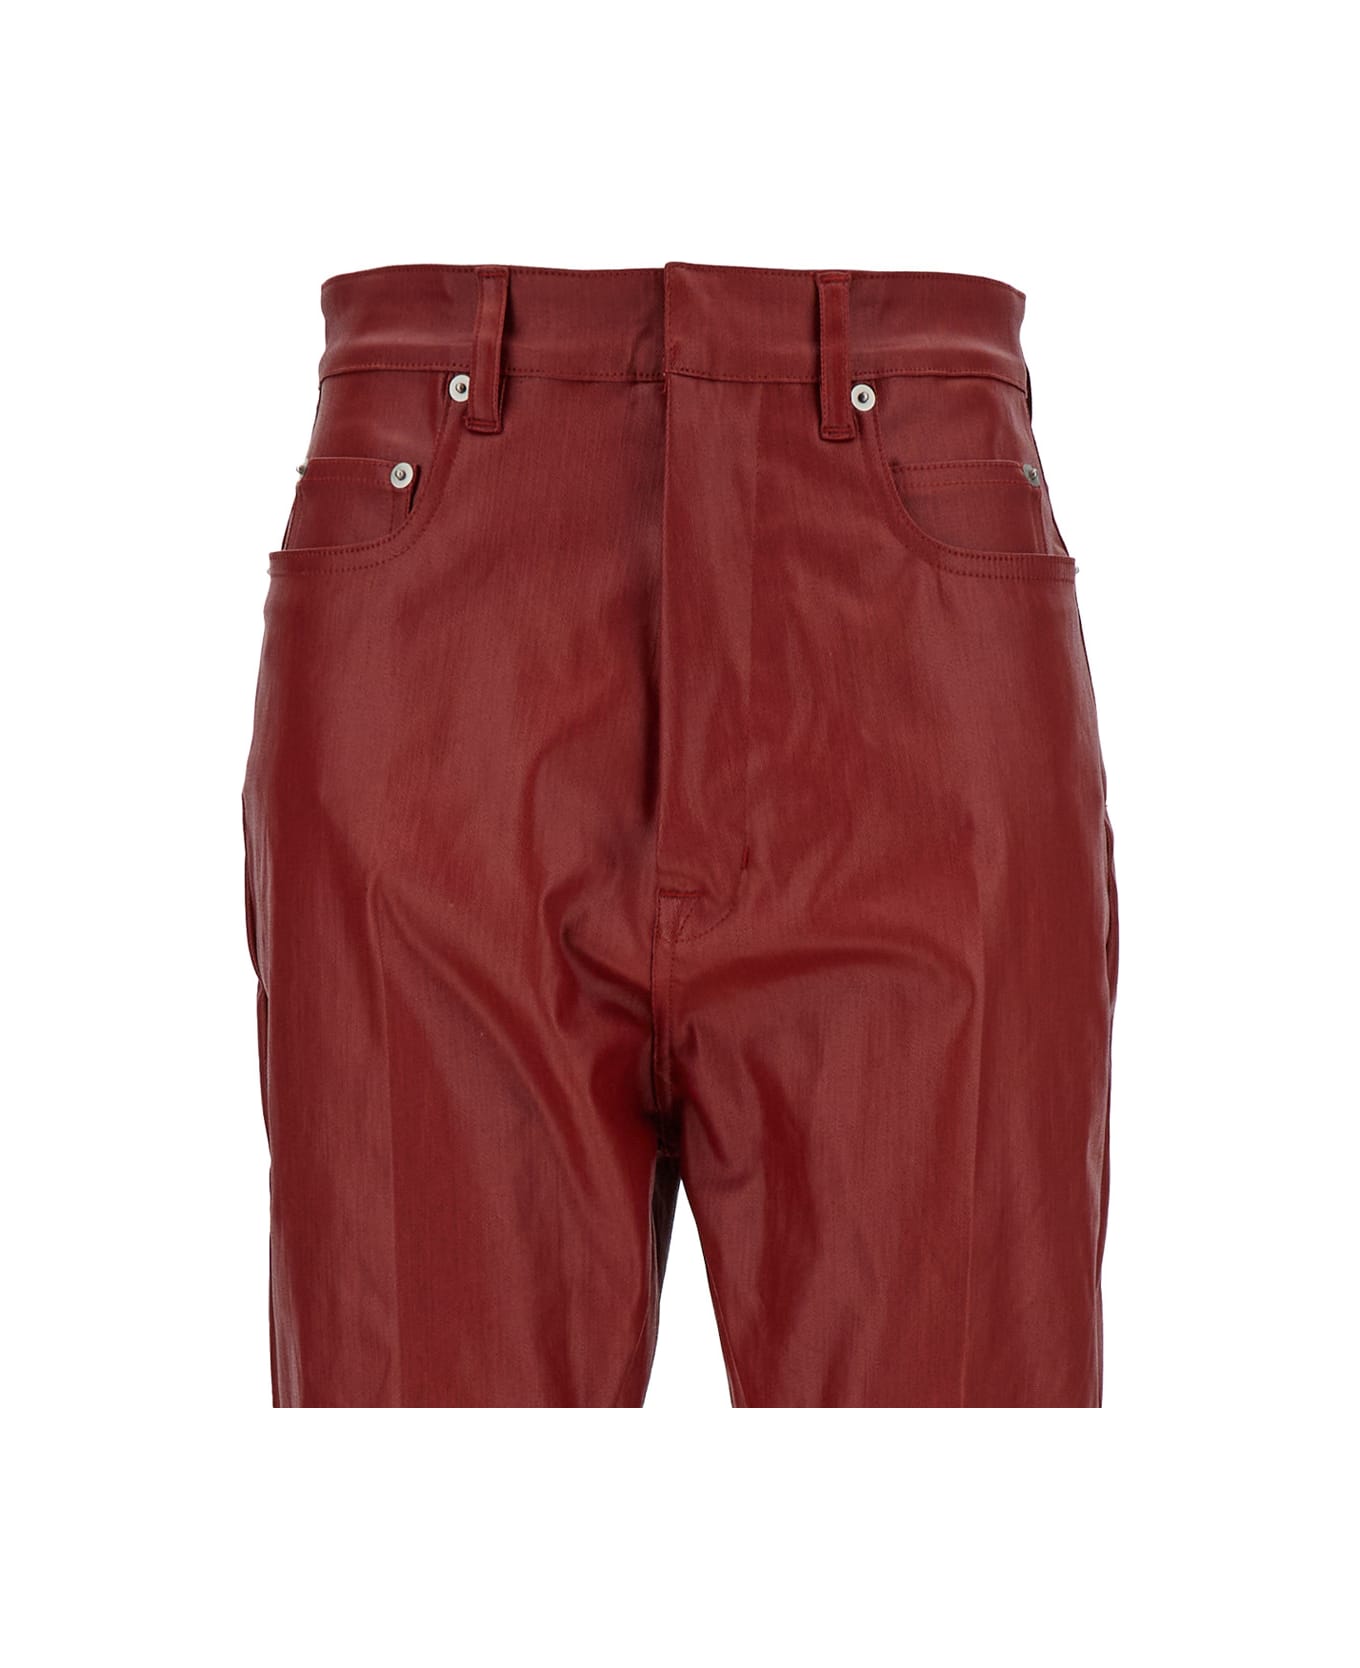 Rick Owens Red Flared High Waist Pants In Cotton Blend Woman - Red ボトムス